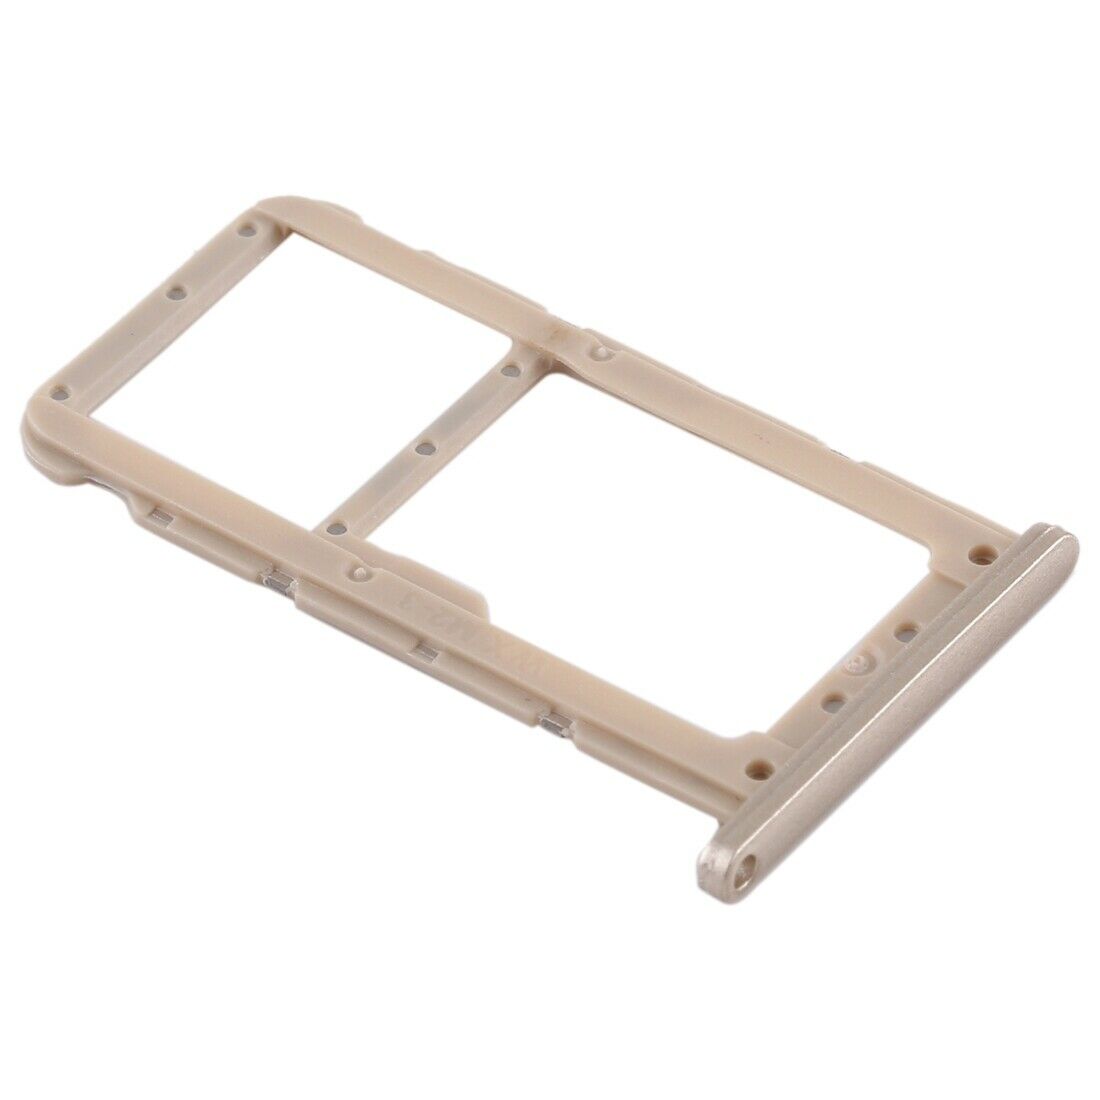 Huawei P20 Lite - Dual SIM Card Holder Tray Slot Gold for [product_price] - First Help Tech